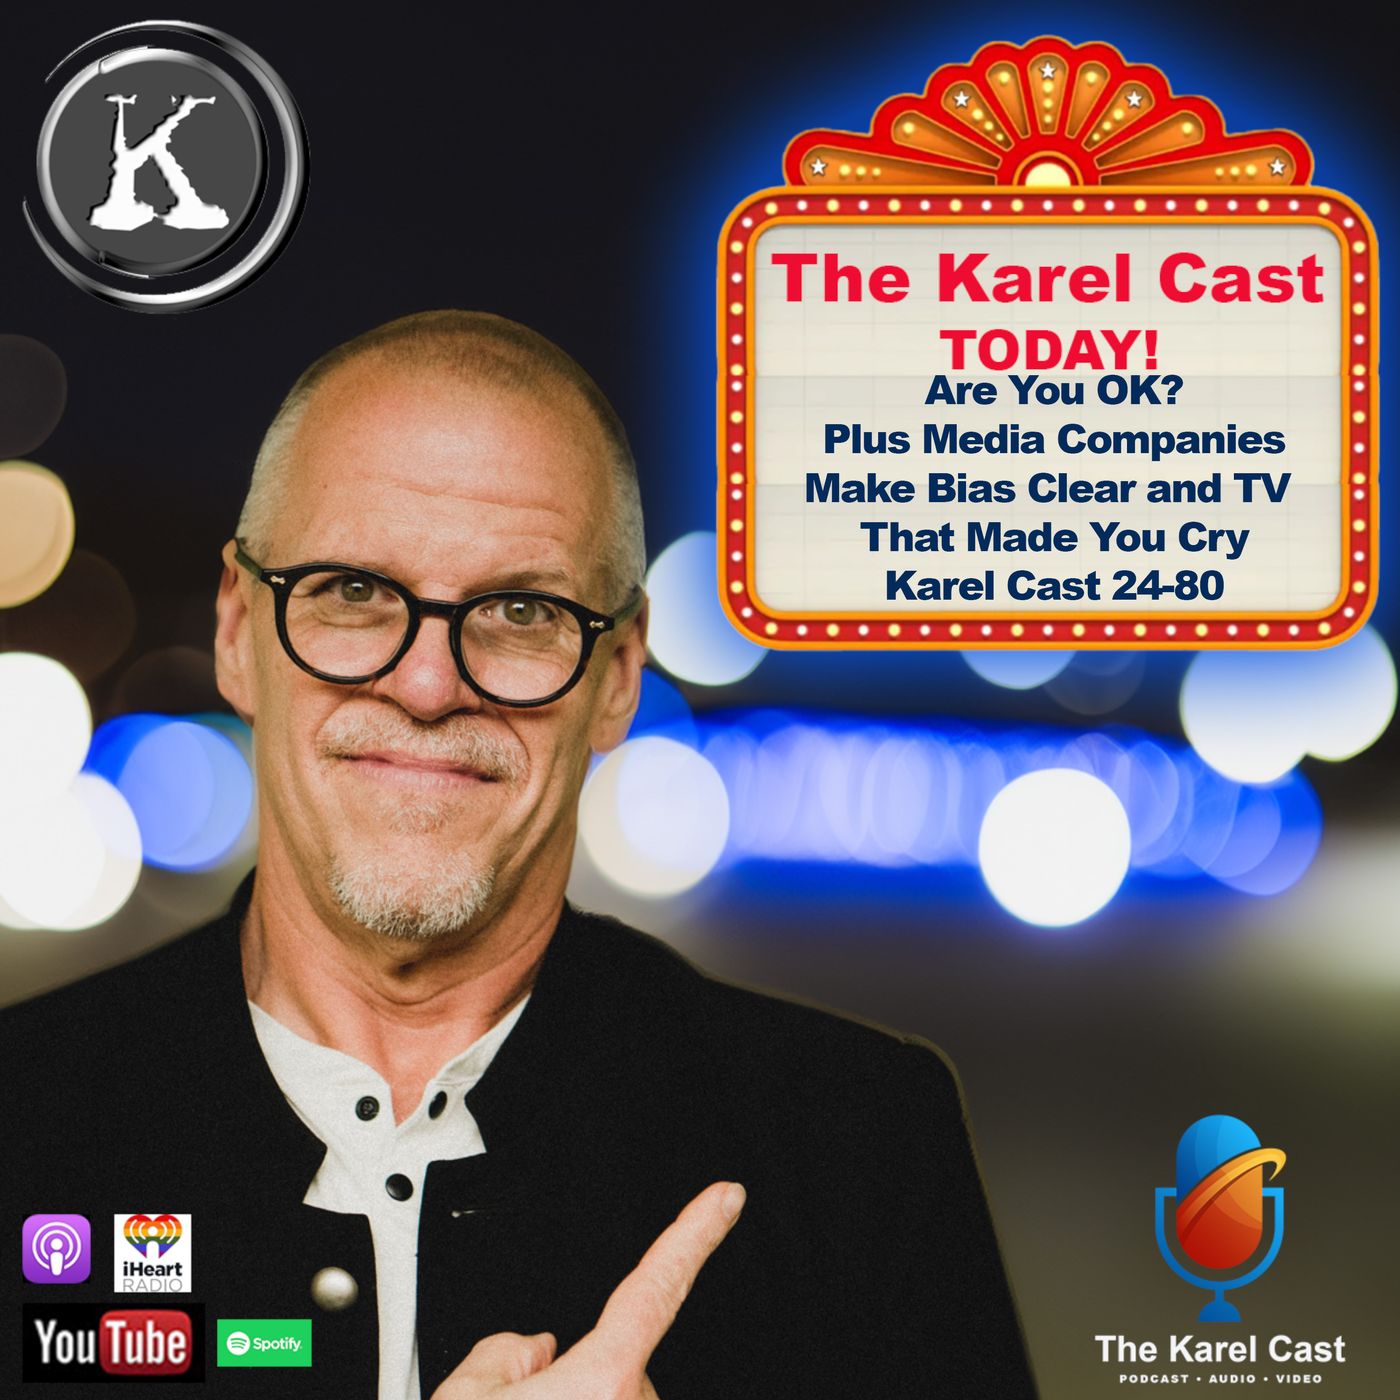 Are You OK? Plus Media Companies Make Bias Clear and TV  That Made You Cry Karel Cast 24-80